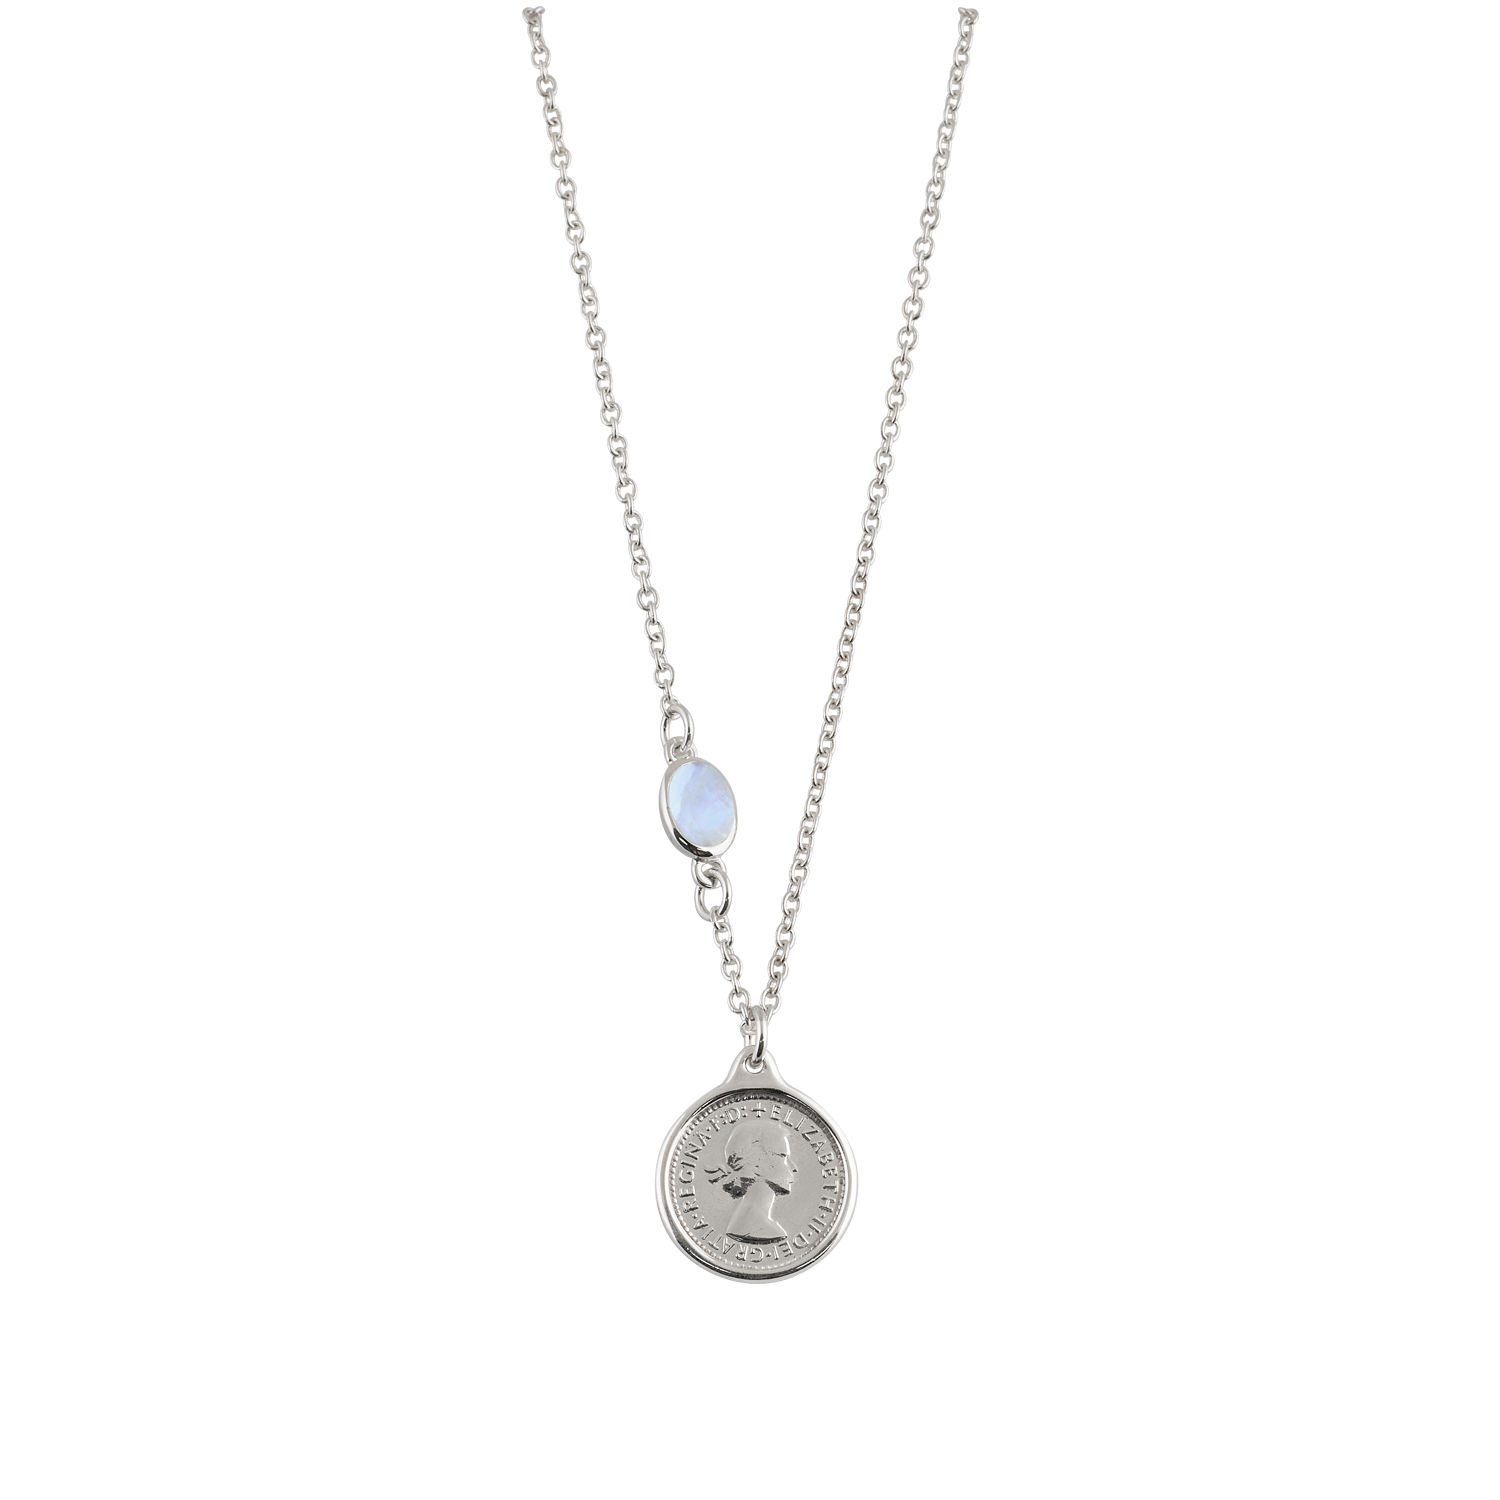 Fine necklace with Threepence and moonstone - Von Treskow